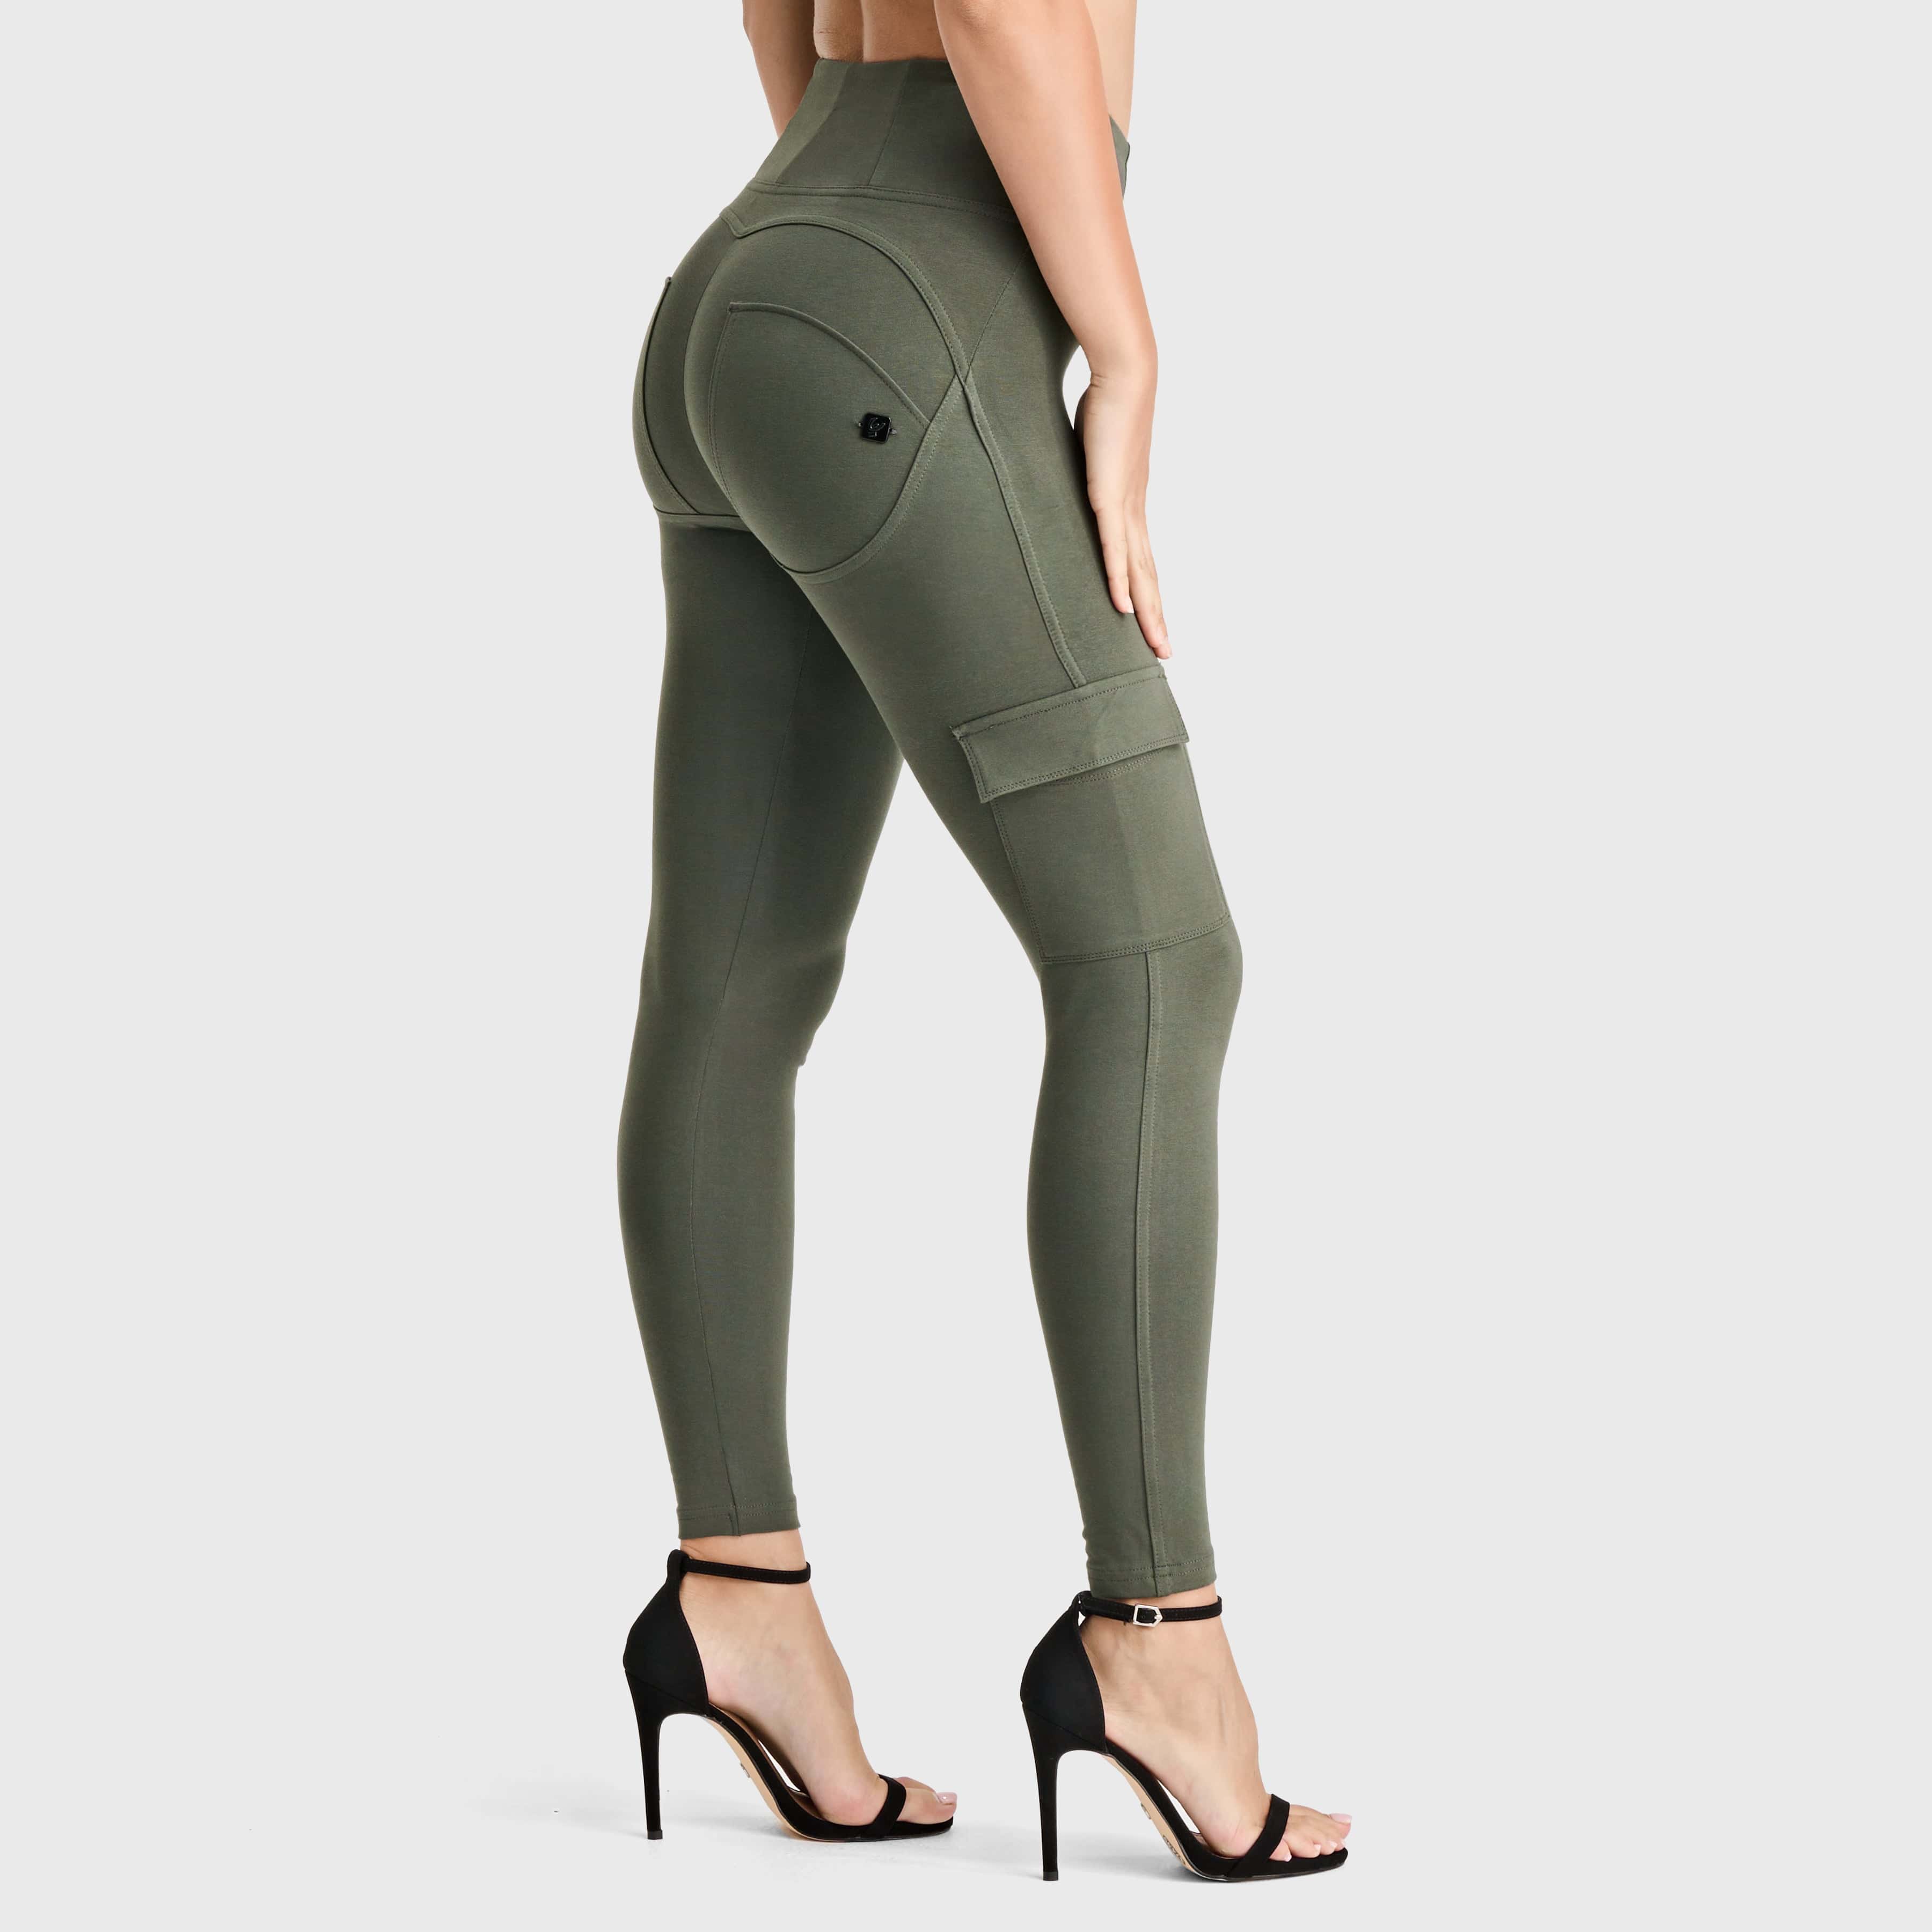 WR.UP® Cargo Fashion - High Waisted - 7/8 Length - Military Green 1